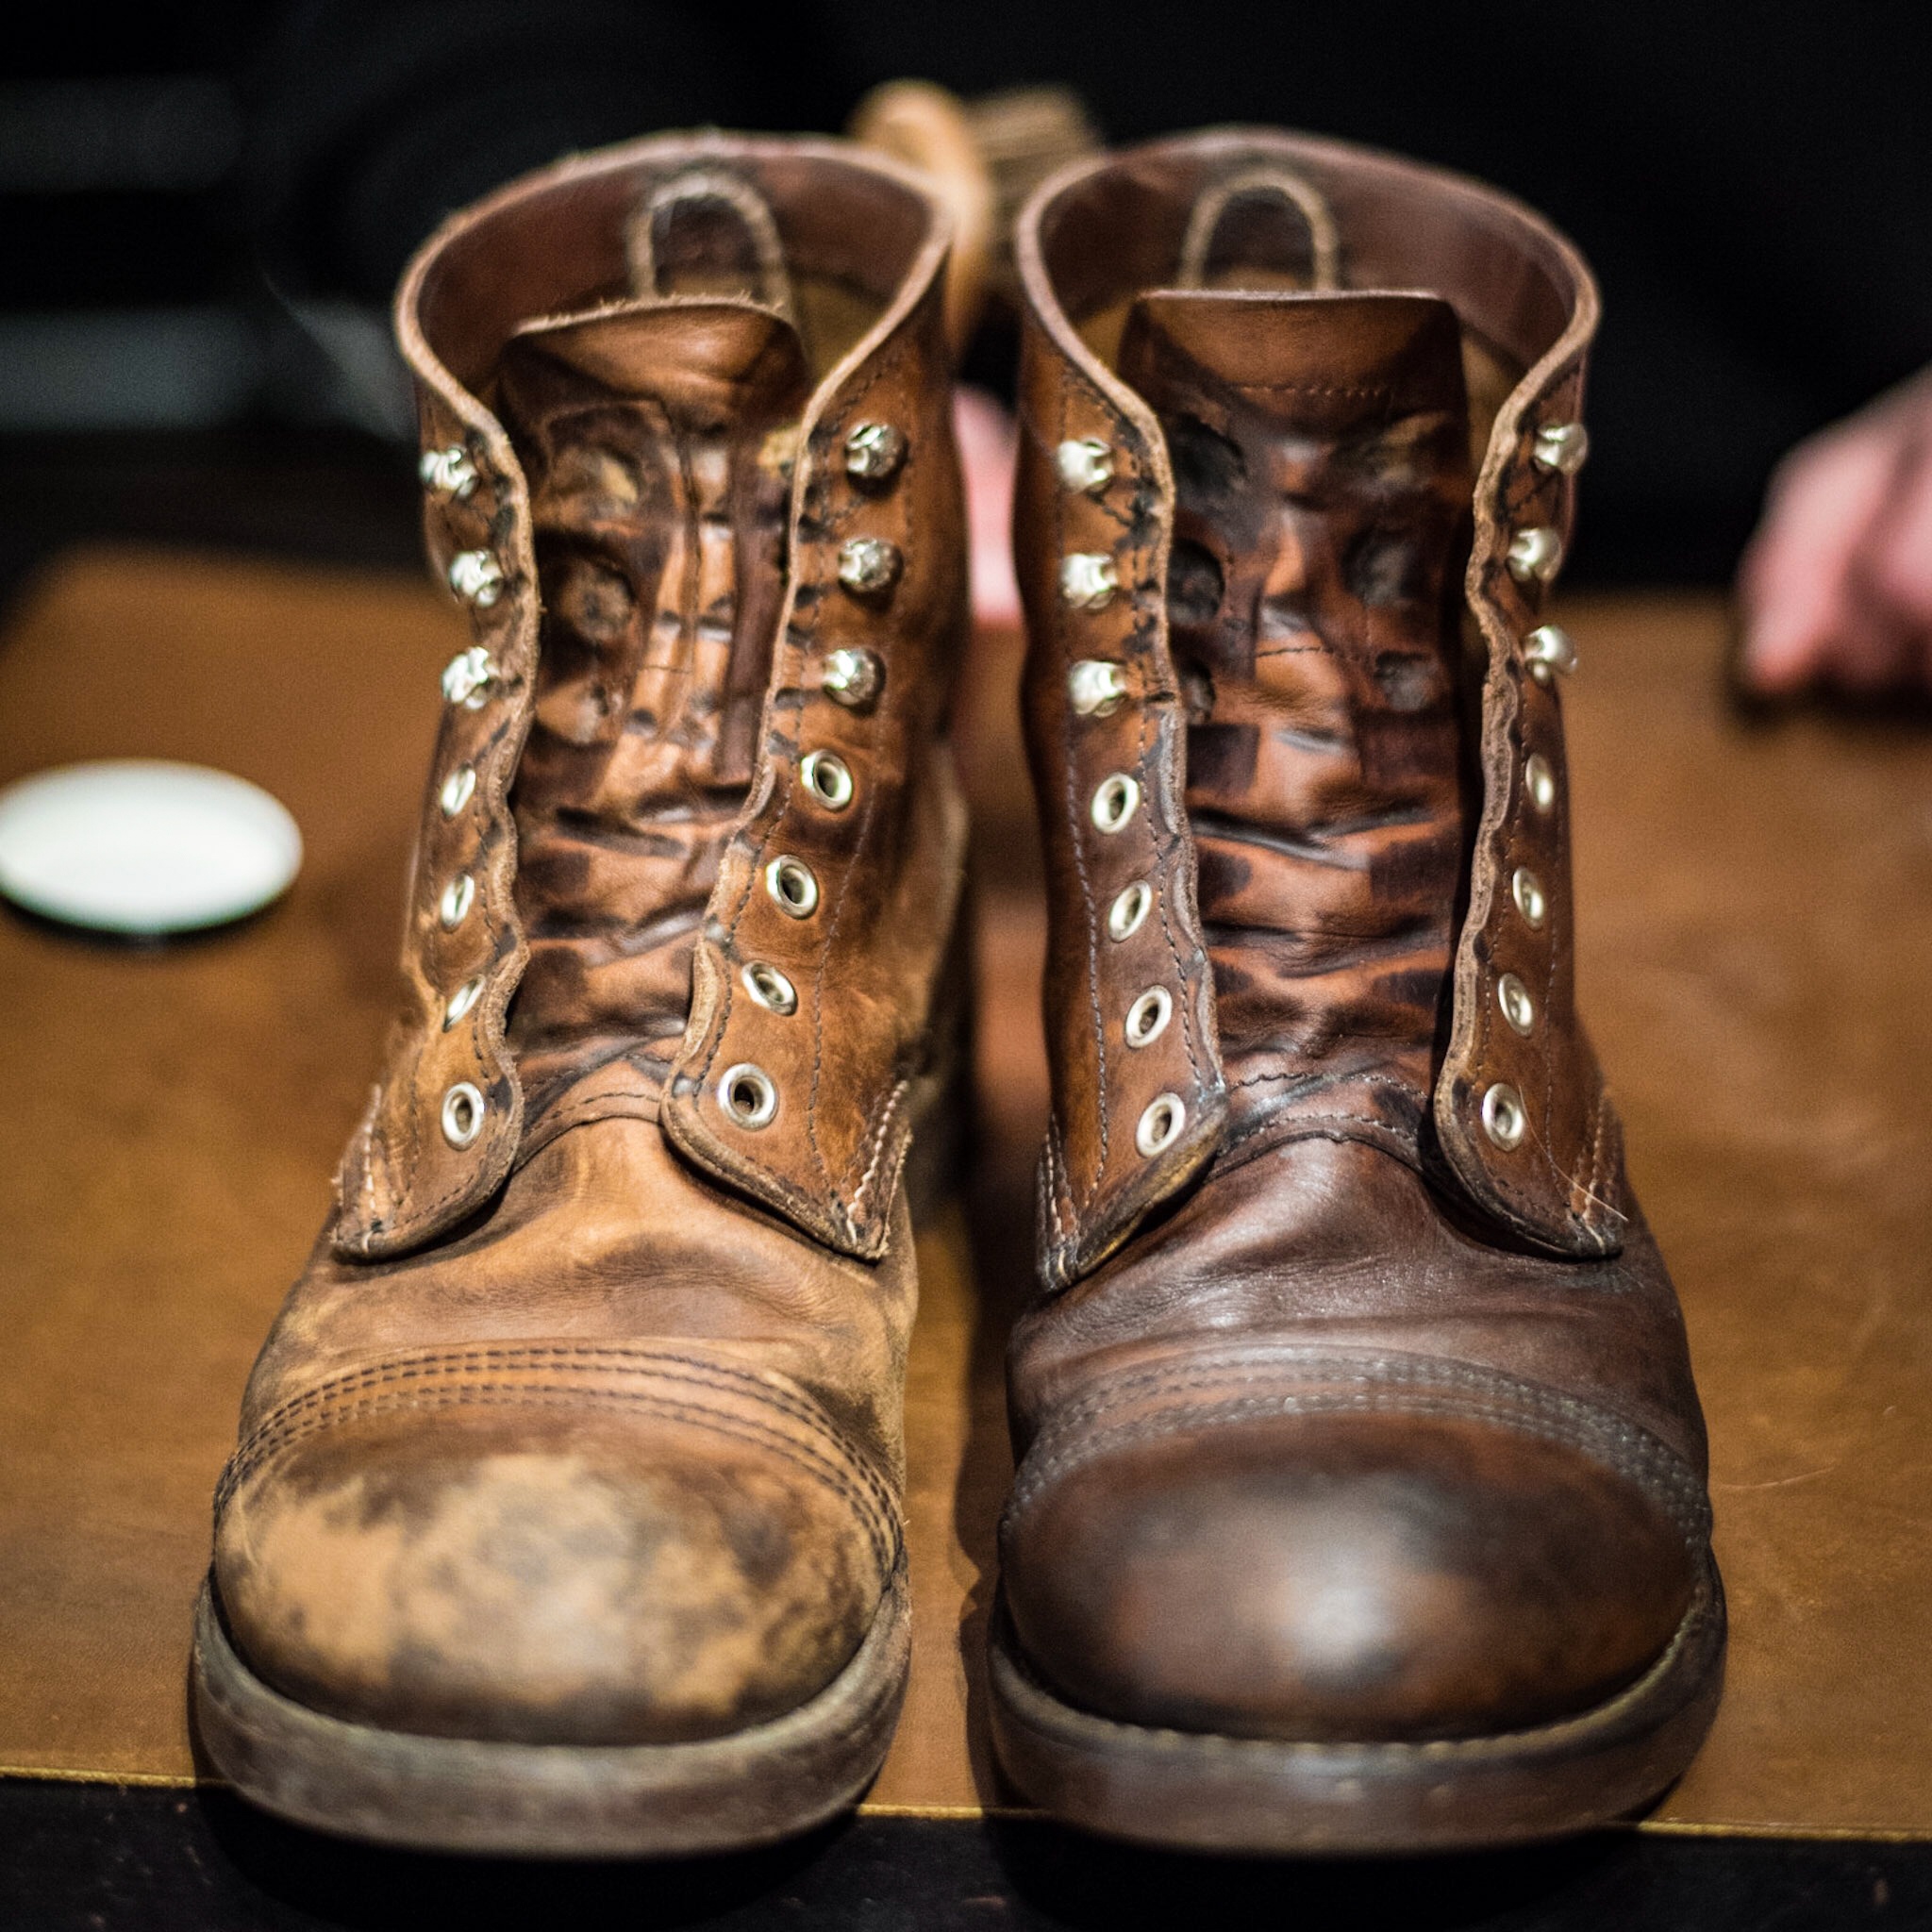 red wing beckman care